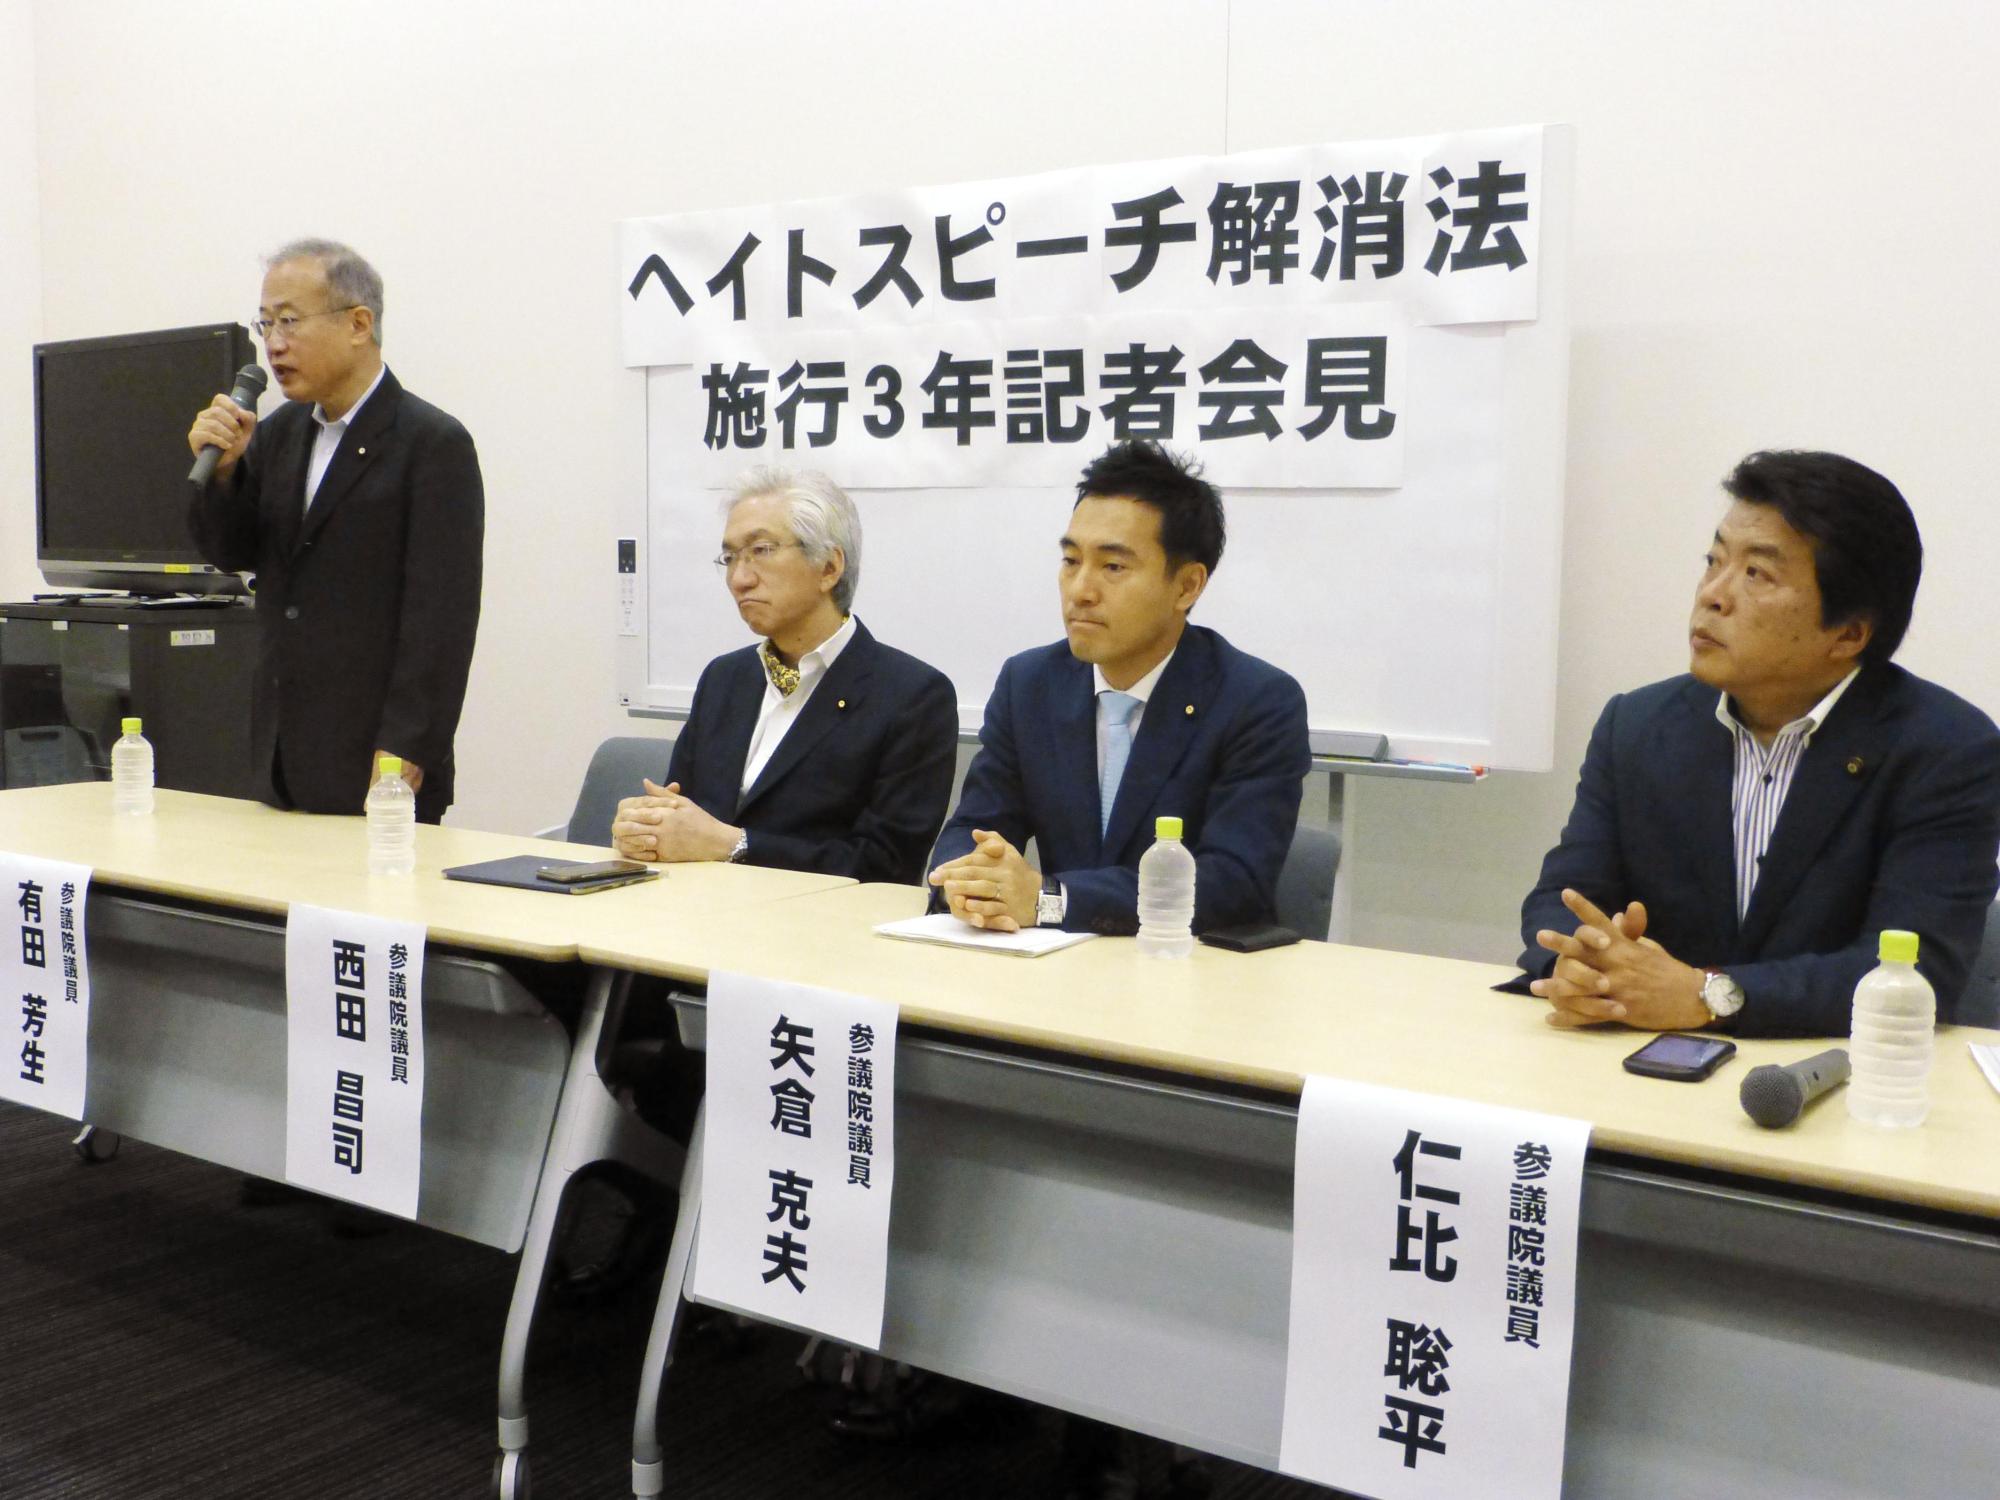 Diet lawmakers (from left) Yoshifu Arita, Shoji Nishida, Katsuo Yakura and Sohei Nihi attend a news conference in Tokyo on Friday during which they called for increased regulation on hate speeches. | KYODO